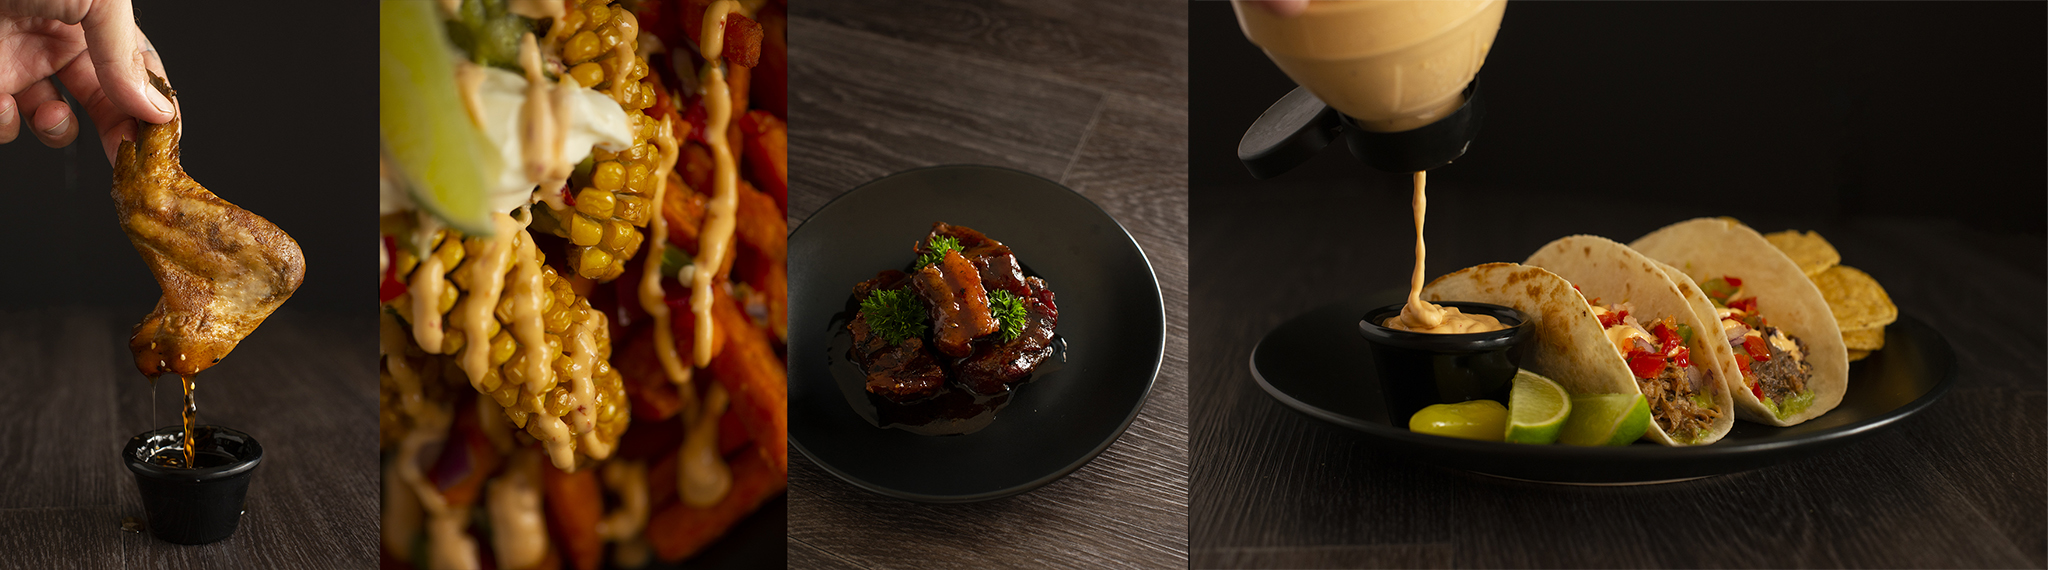 4 food images. First is a close up of a hand dipping a cooked chicken wing in a sticky brown sauce. Second is a colourful closeup of corn and sweet potato chips with lime & orange sauce. Third is a black plate with bbq sauced pork belly bites & a green parsley garnish. Last image is a black plate filled soft tacos & a side drizzle of orange sauce.